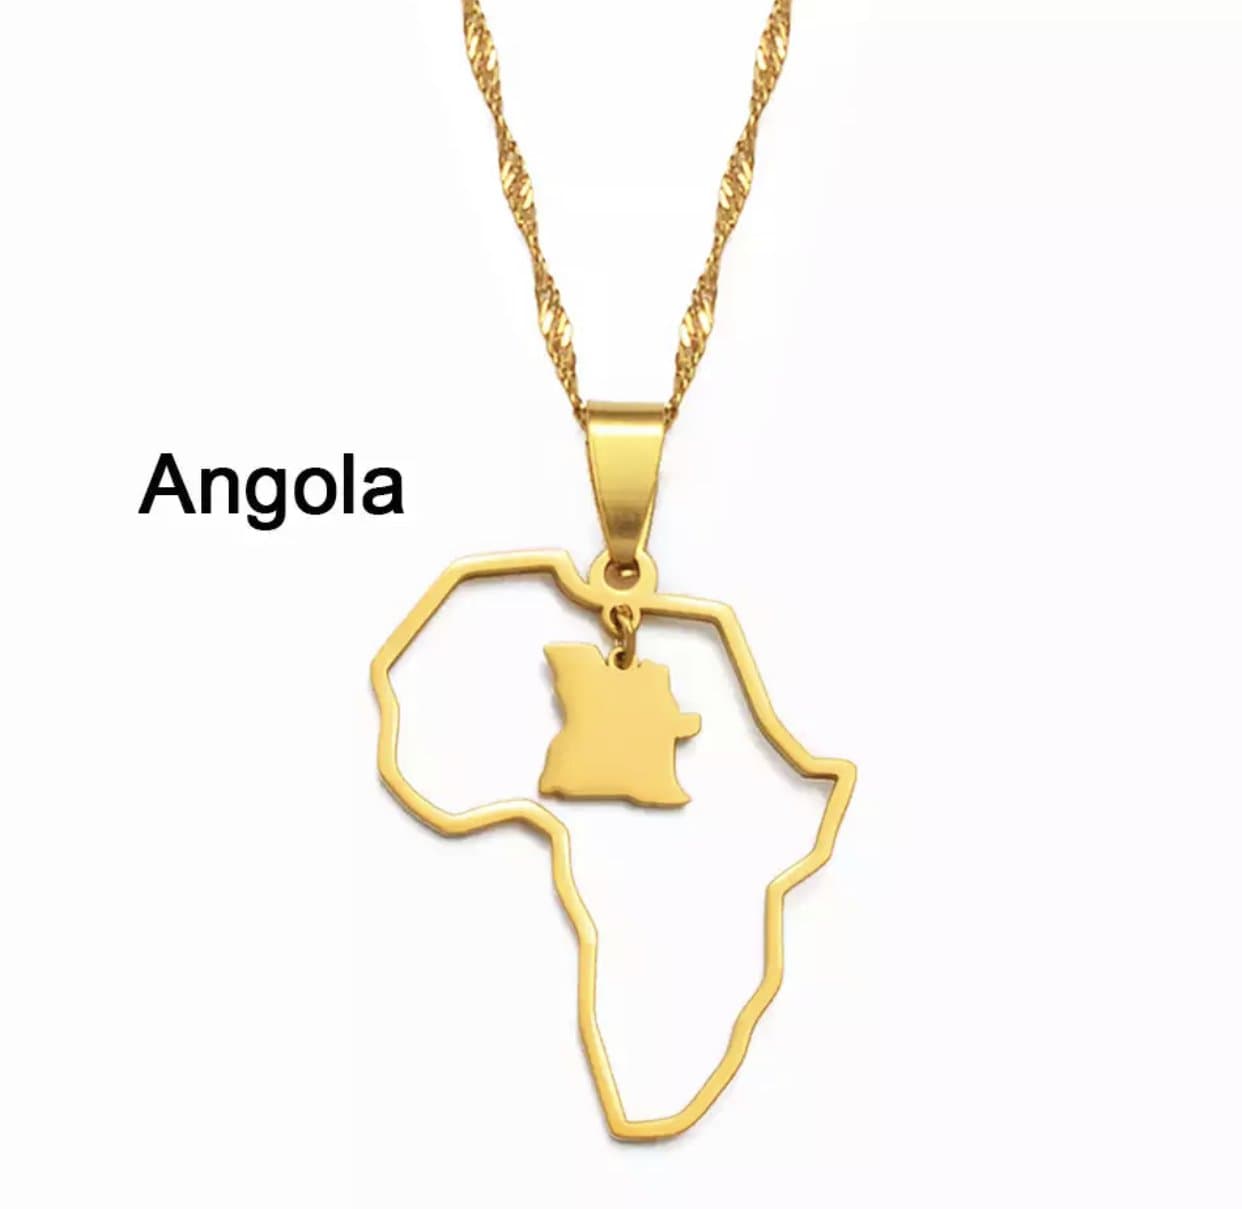 Veryldesigns Necklace Angola Custom African country Necklace